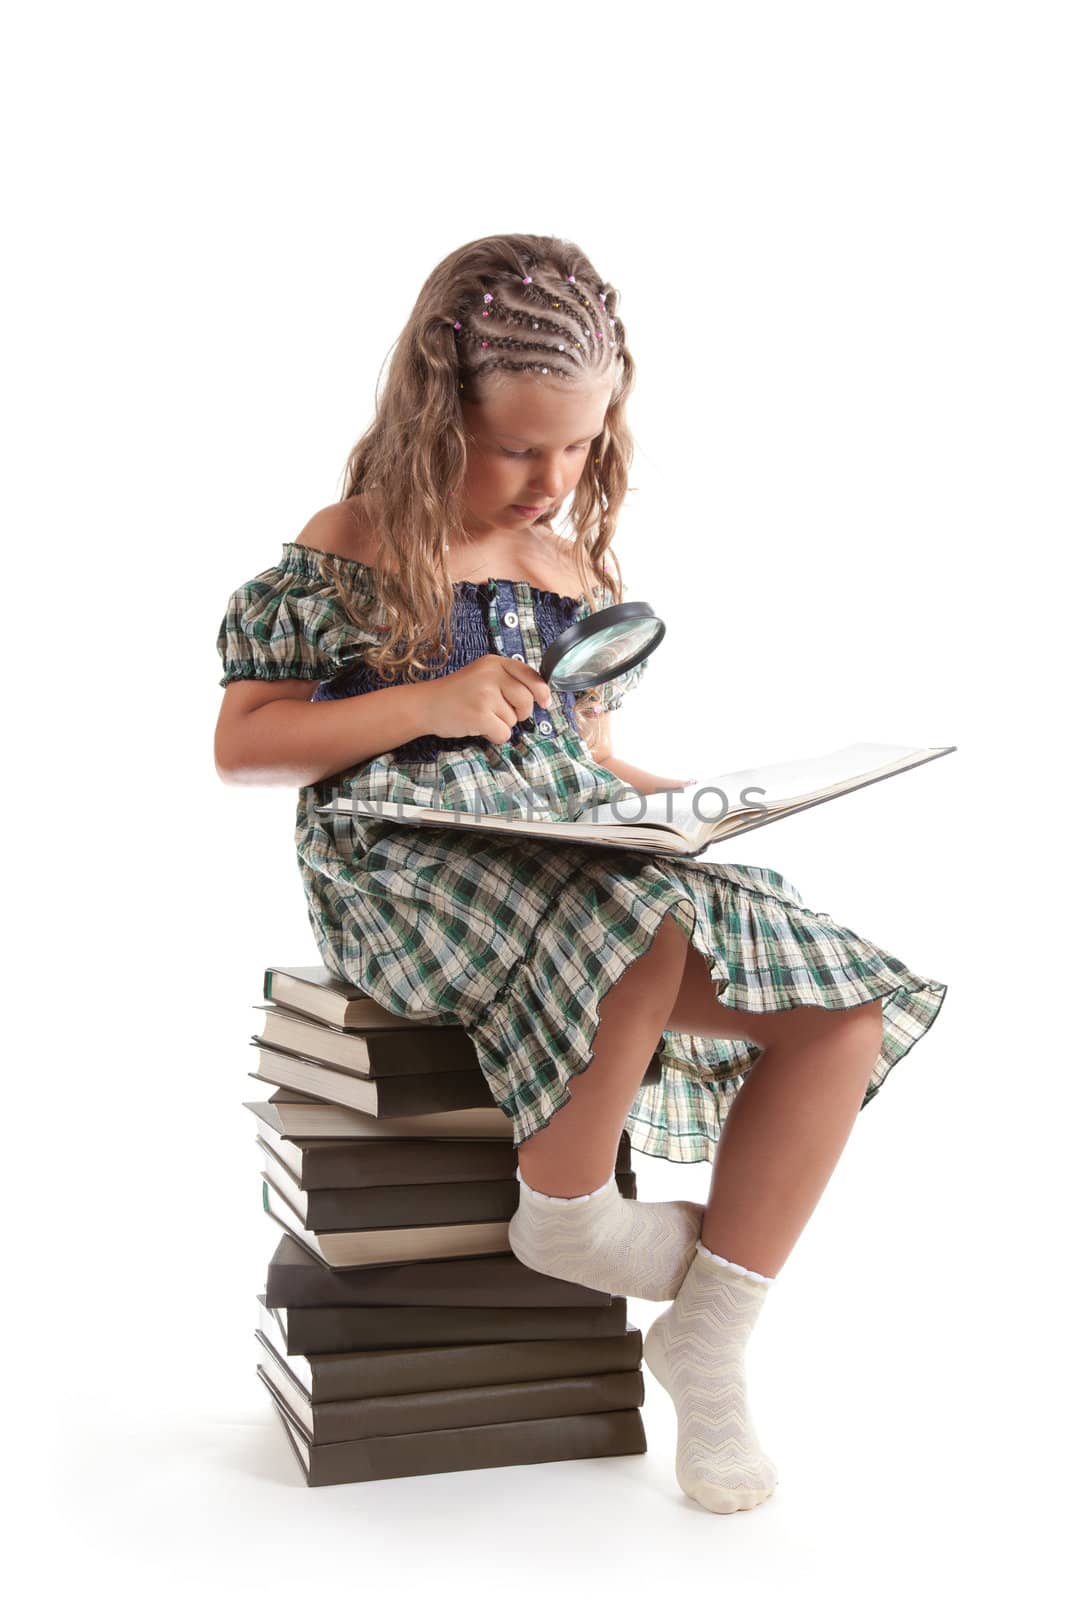 Little girl with magnifying glass reading book, isolated on white background 